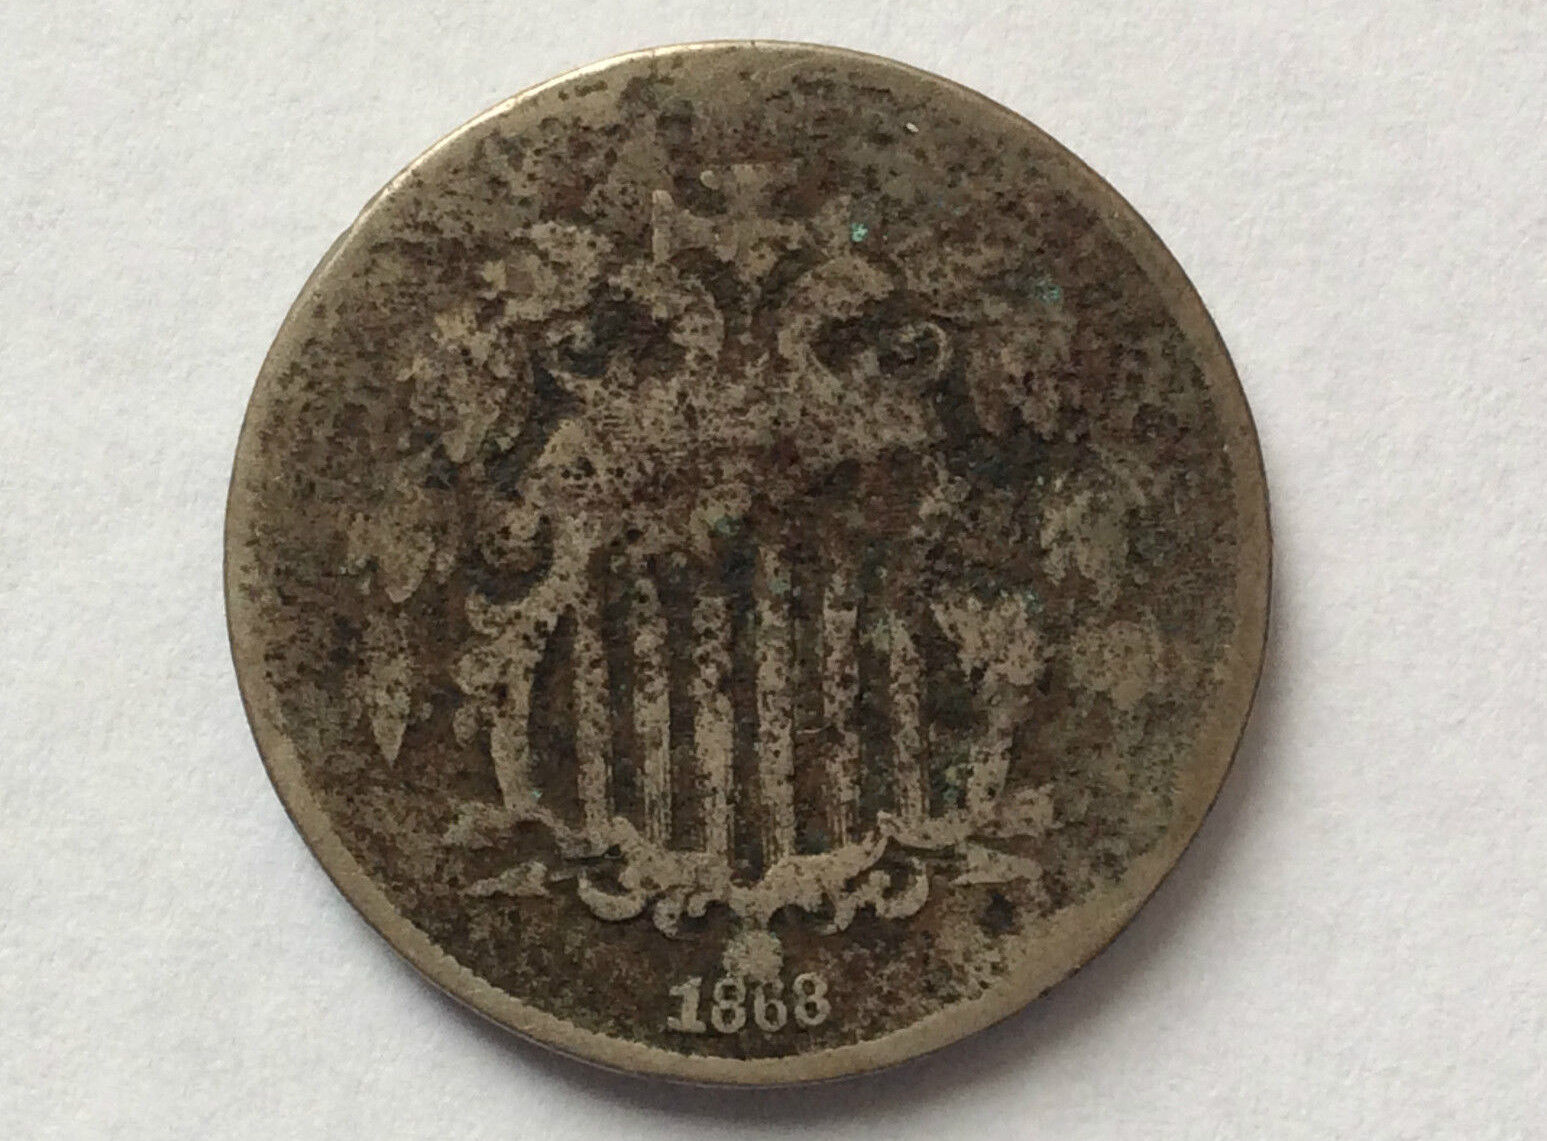 1868 Shield Nickel Great Long Beach Mall Type A3118 Coin Baltimore Mall S. U.